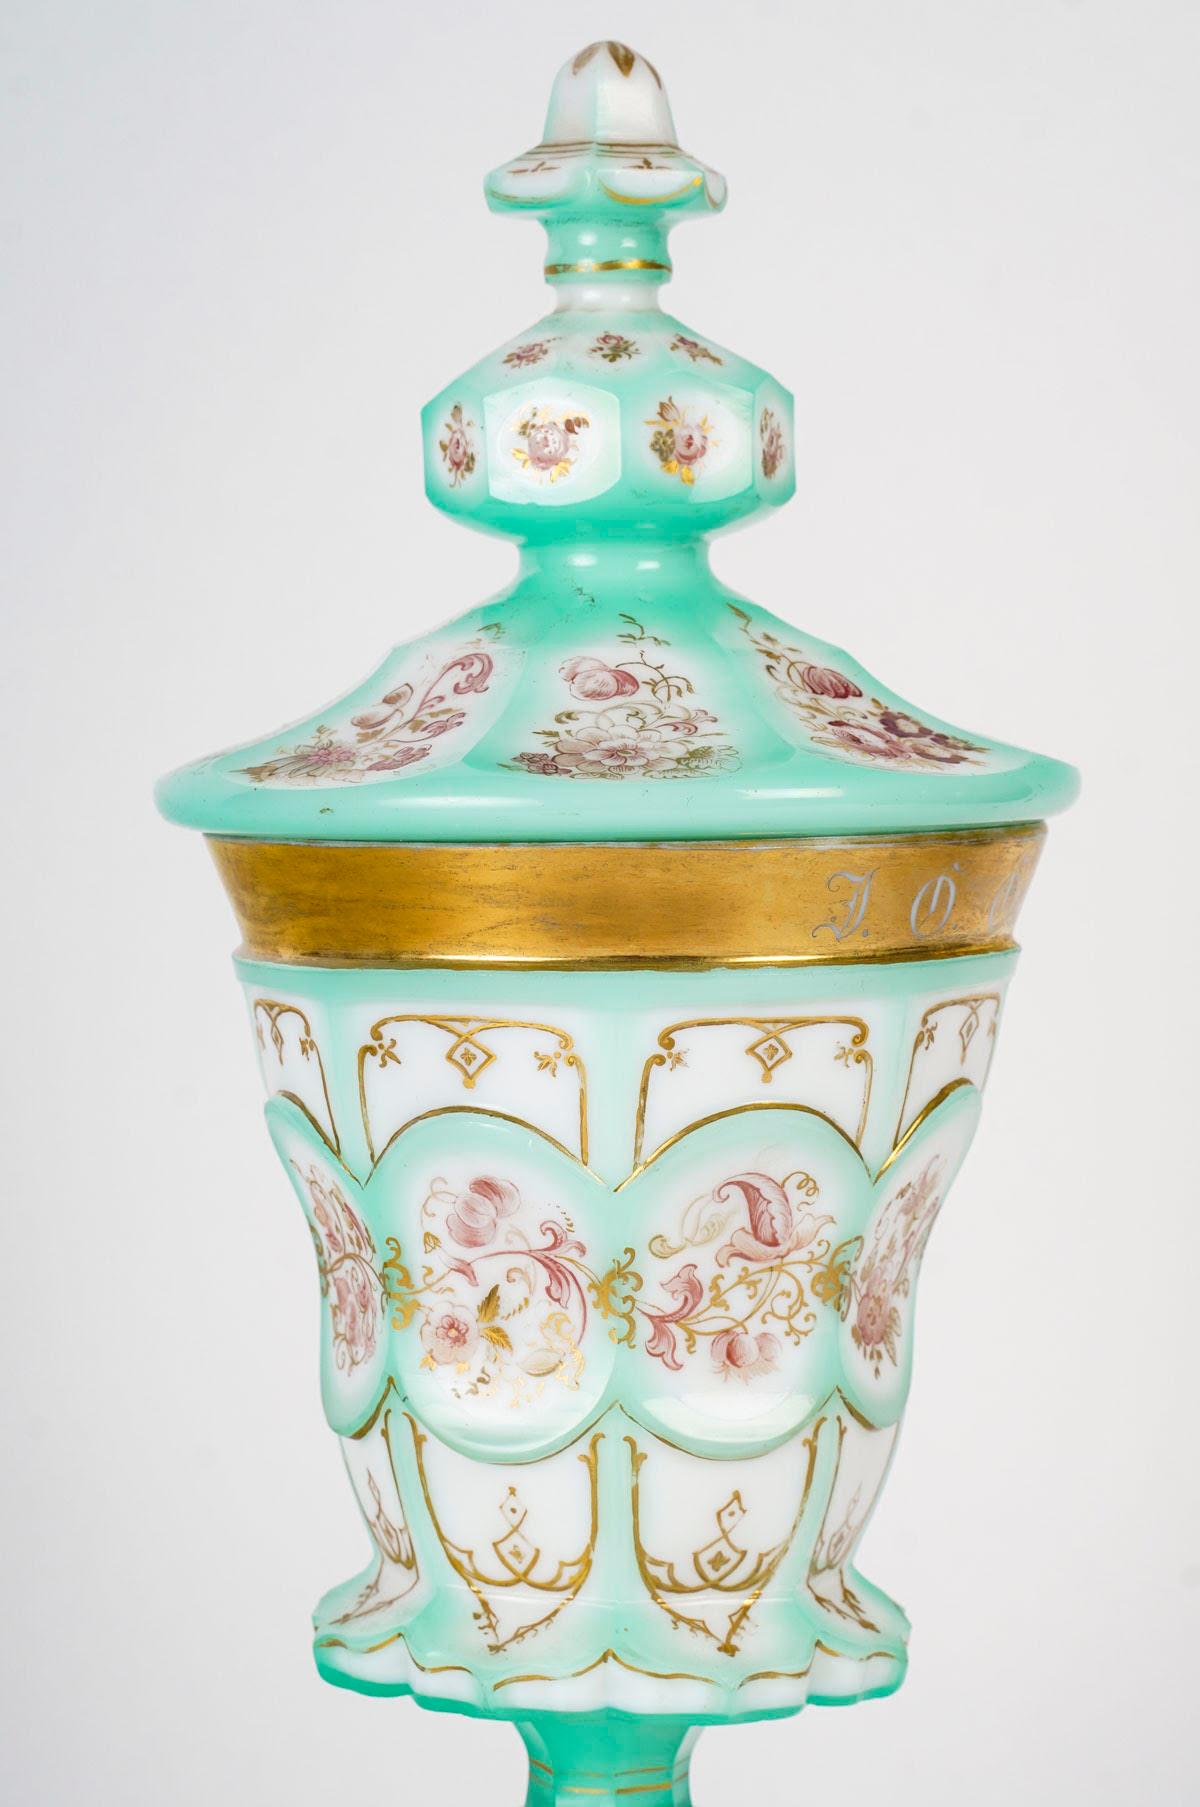 Large Goblet in Opaline Overlay, 19th Century, Napoleon III period.

19th century goblet, Napoleon III period, in Overlay opaline.
h: 37cm, d: 13,5cm